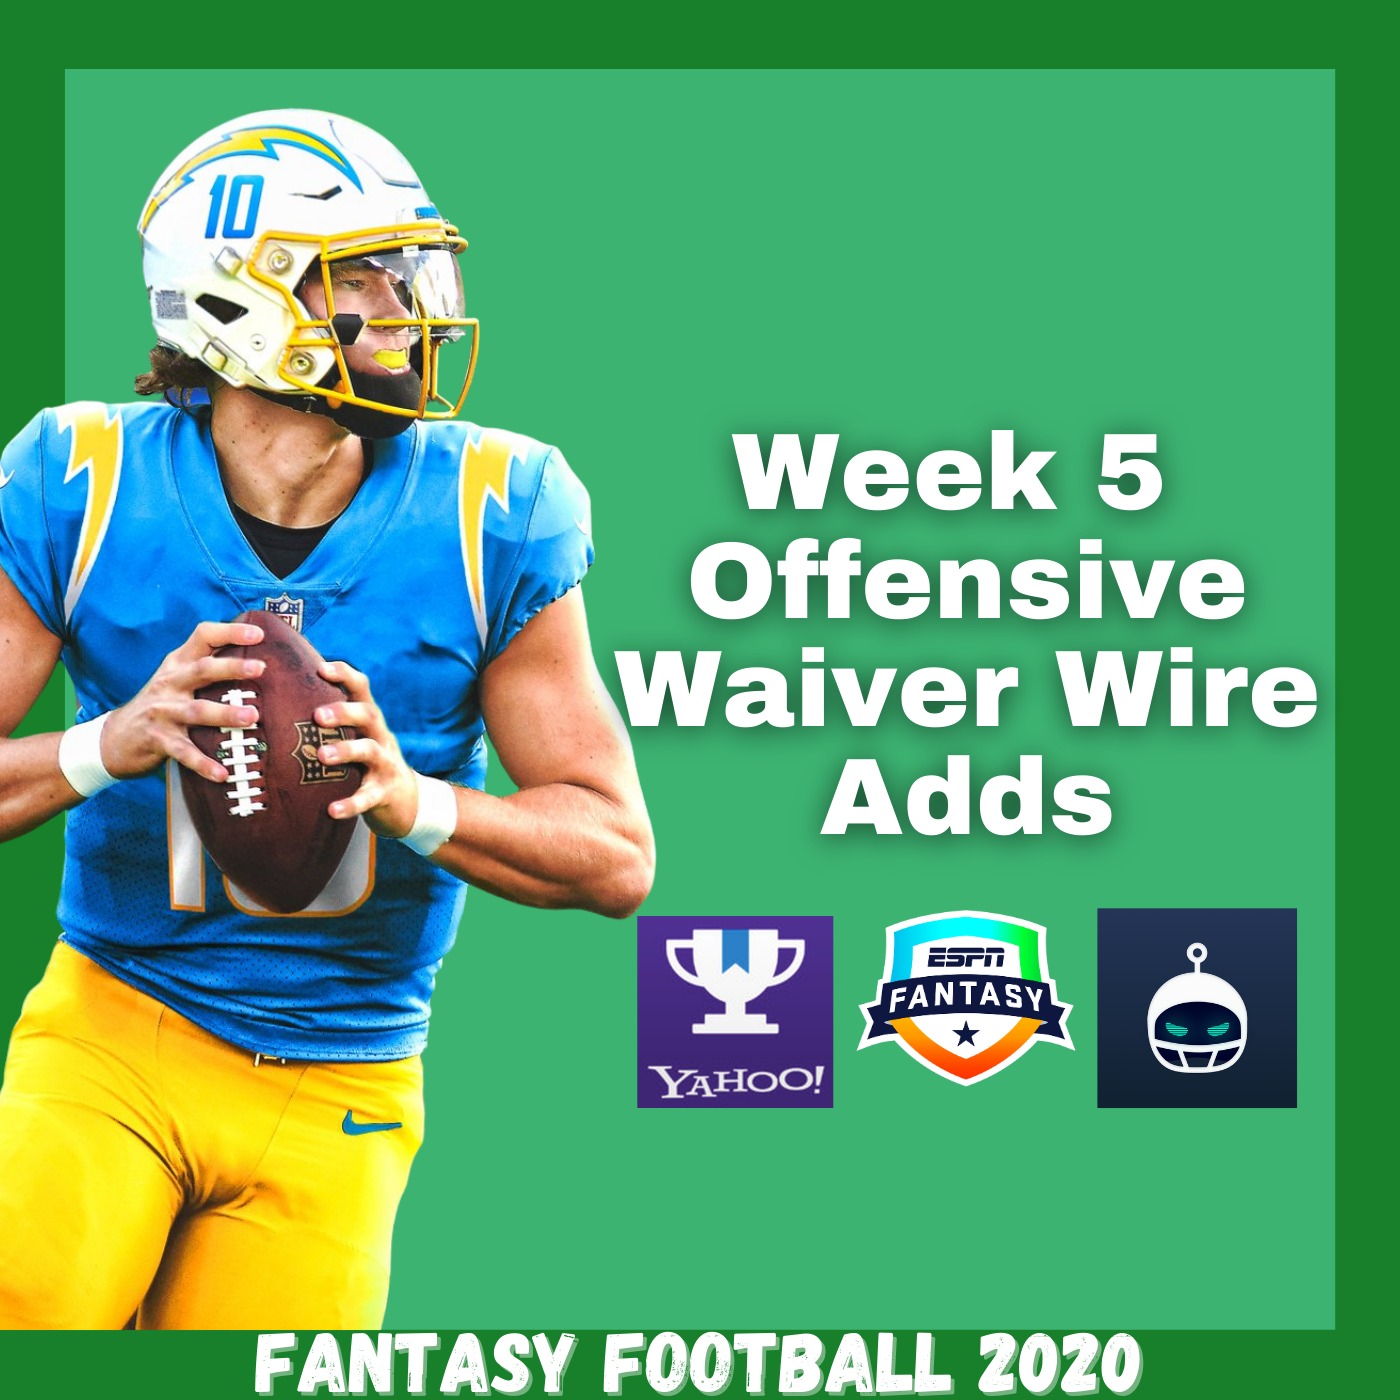 Week 5 Offensive Waiver Wire Adds | Money Makin' Moves Image